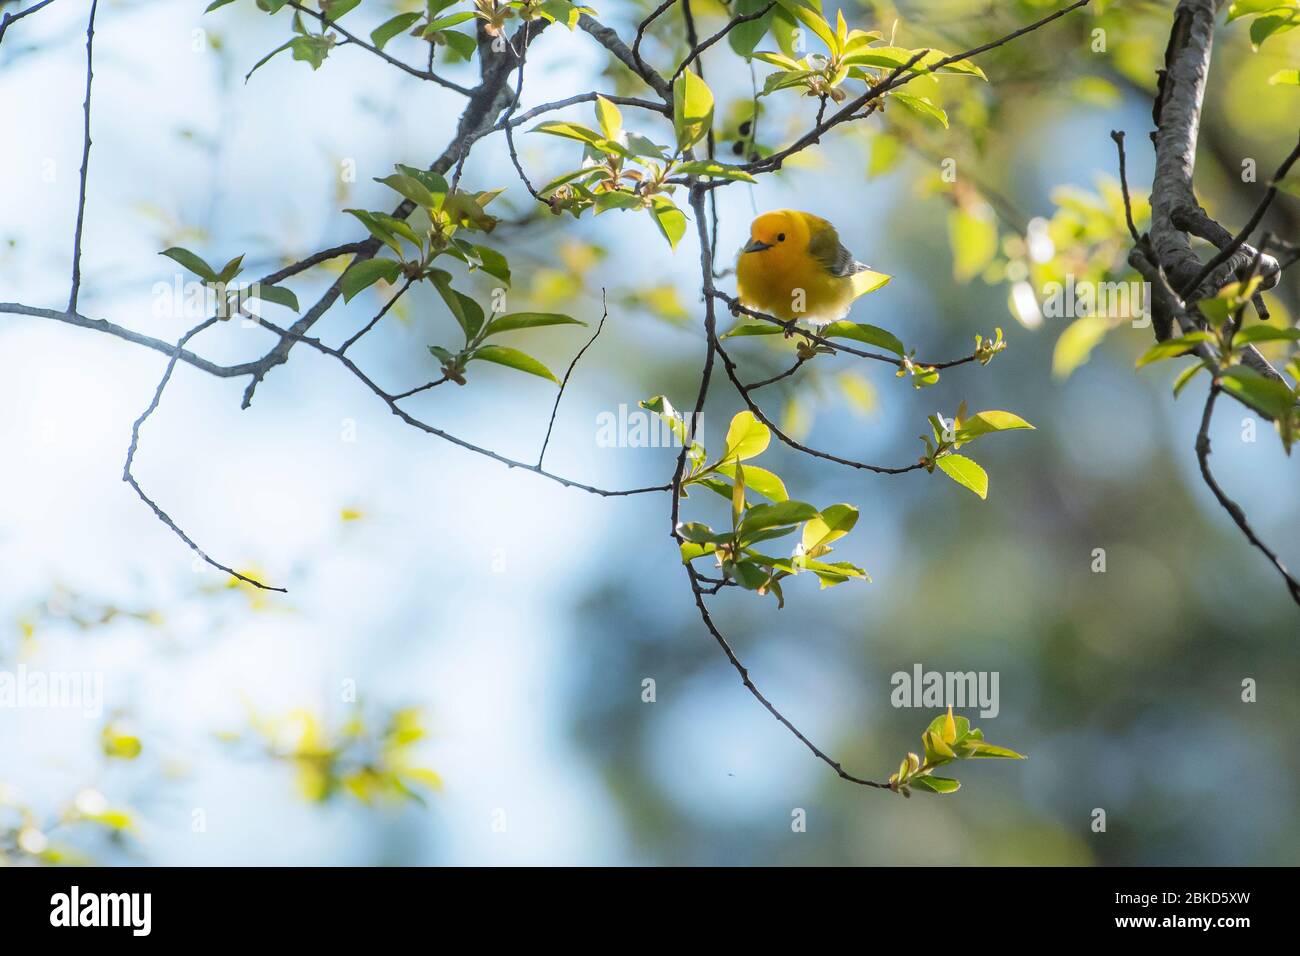 Prothonotary  warbler during spring migration Stock Photo